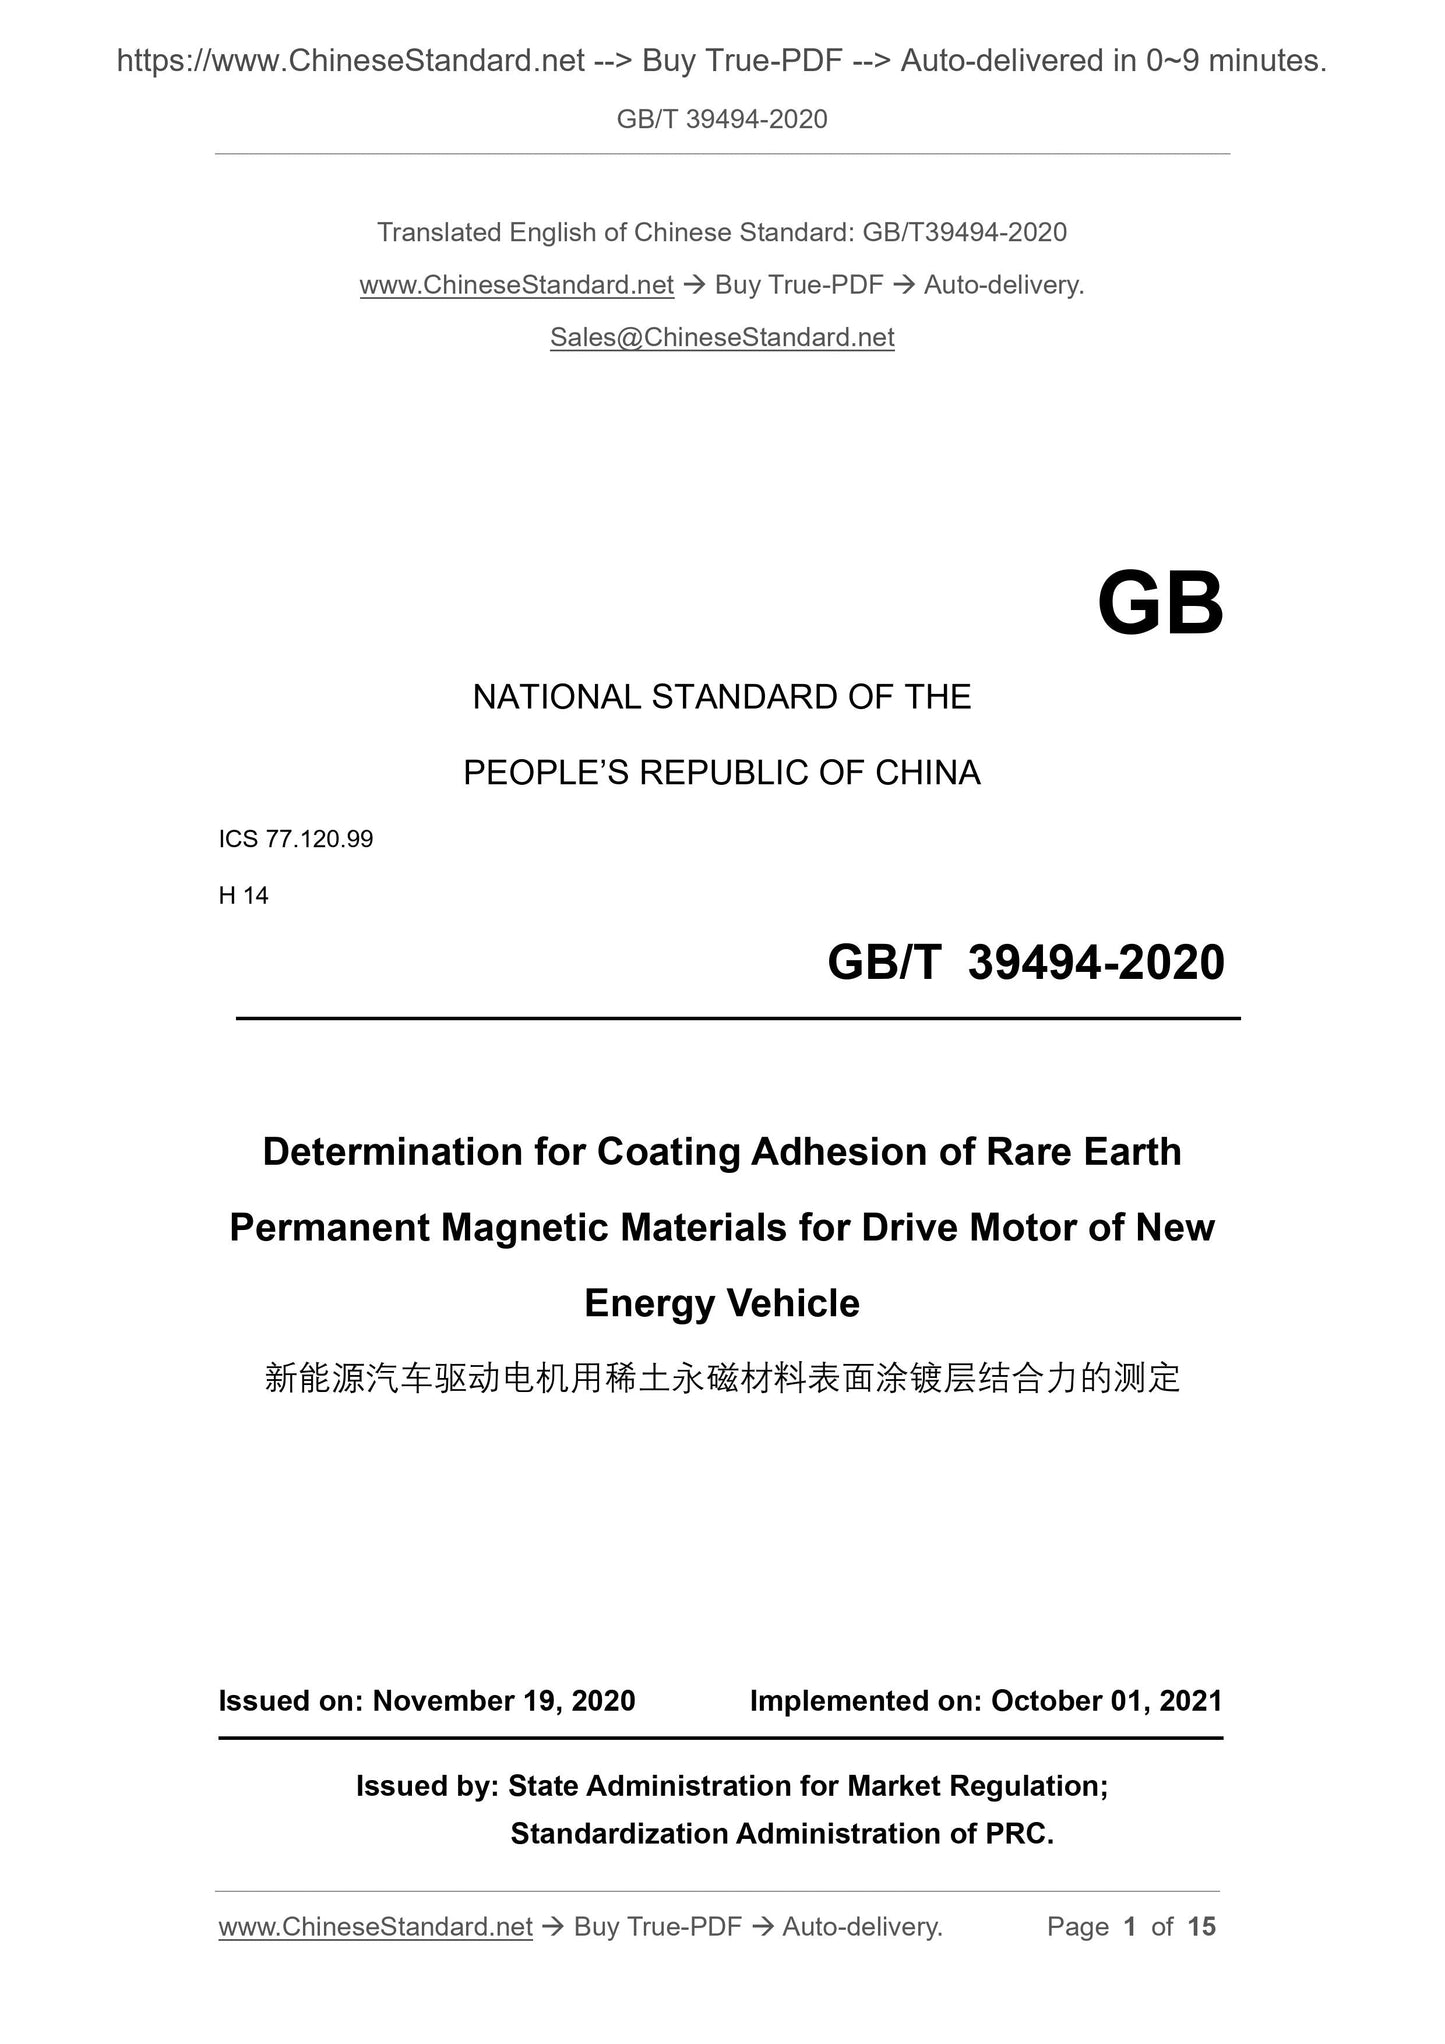 GB/T 39494-2020 Page 1